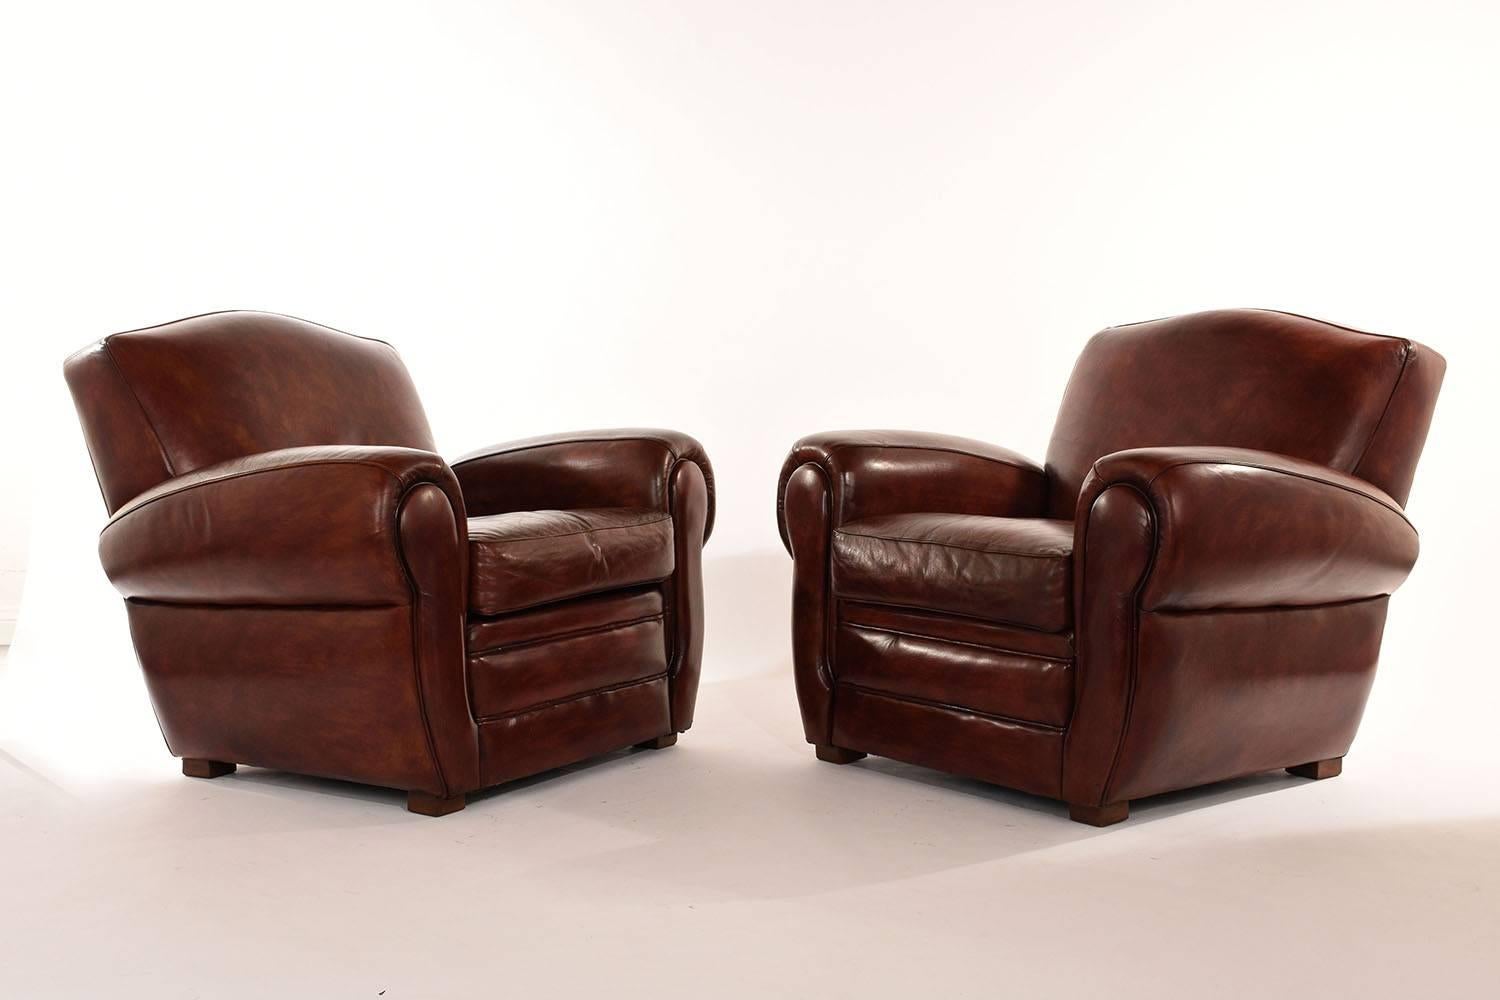 This pair of Art Deco-style club chairs is fully upholstered in leather. The rounded back and arms are accented with nailhead trim on the backside. The comfortable seats feature a single loose cushion and accented with single piping trims. The